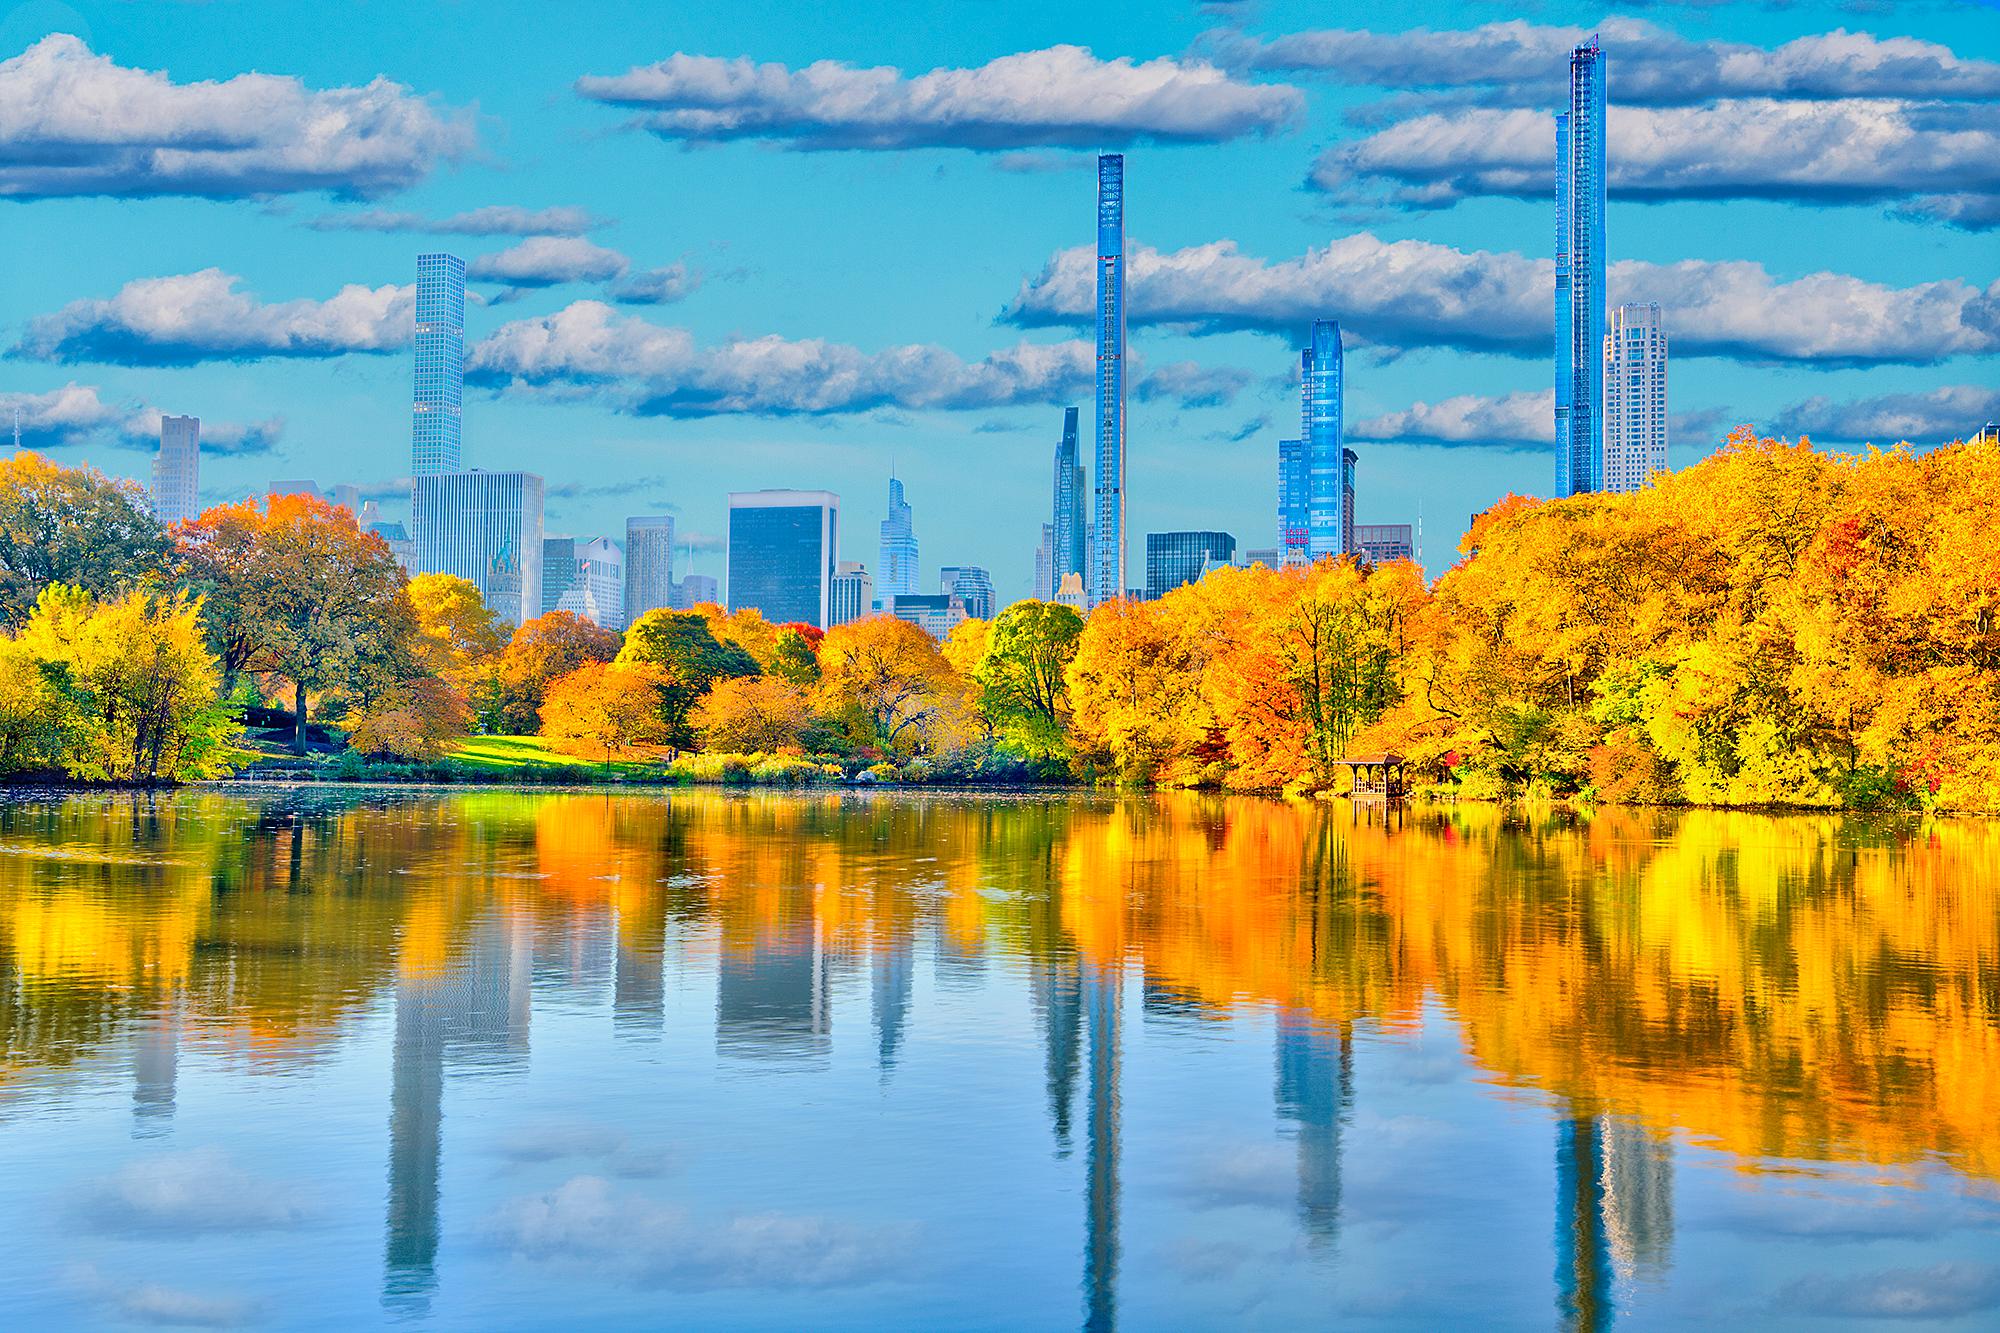 Mitchell Funk Color Photograph - Billionaires' Row Manhattan from Central Park in Autumn colors  Heaven and Earth